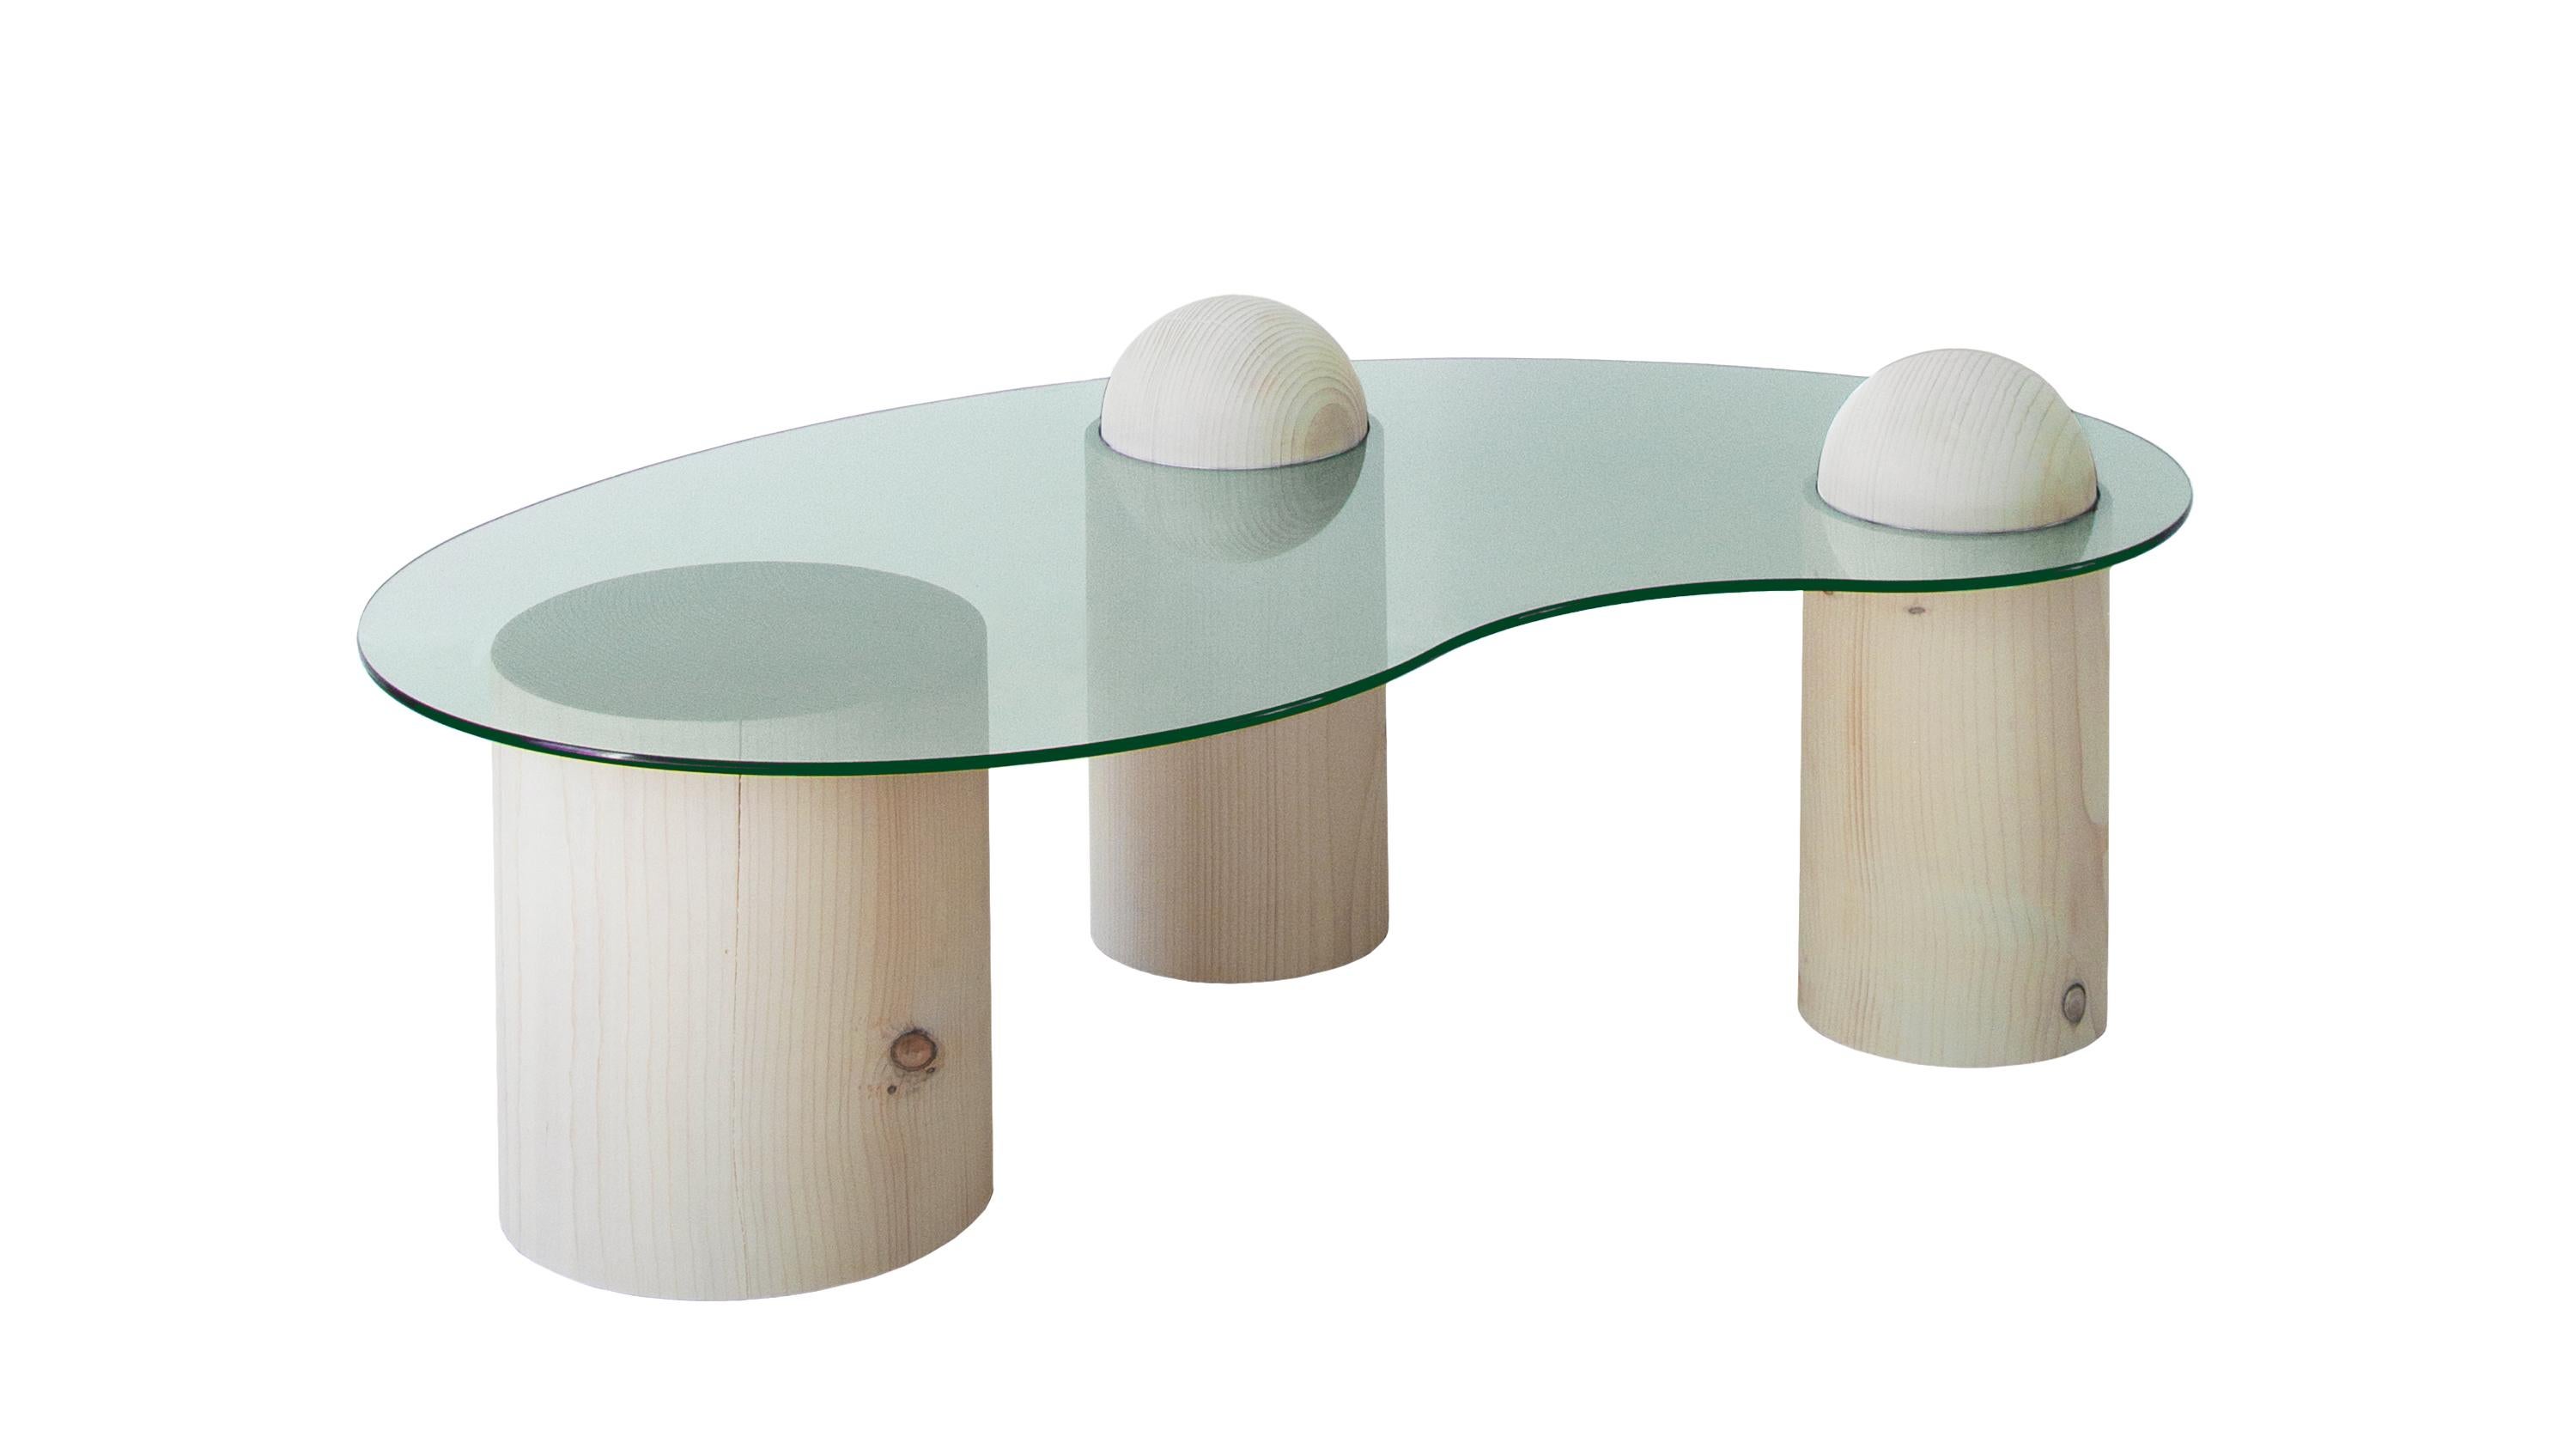 Jonas Coffee Table by LI-AN-LO Studio
Dimensions: D 70 x W 120 x 44 cm.
Materials: Spruce and clear tempered glass.

Clear or bronze coloured glass top options available. Please contact us.

The Bean Coffee Table imitates the natures force of